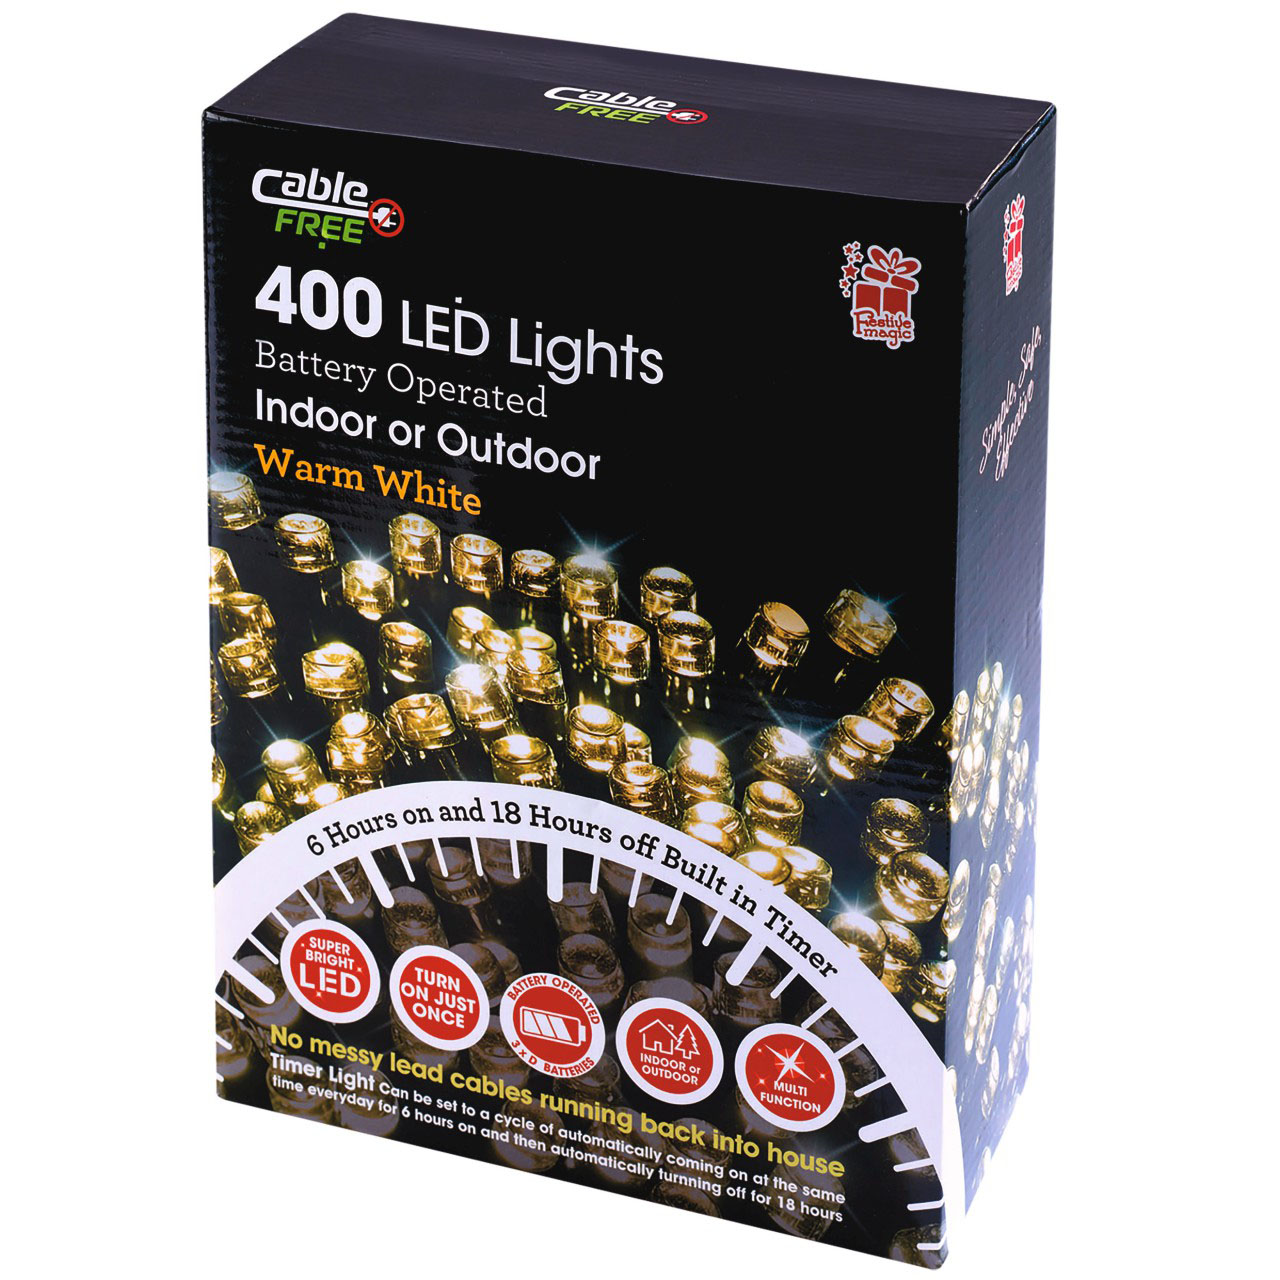 Indoor and Outdoor Battery Operated 400 LED Lights